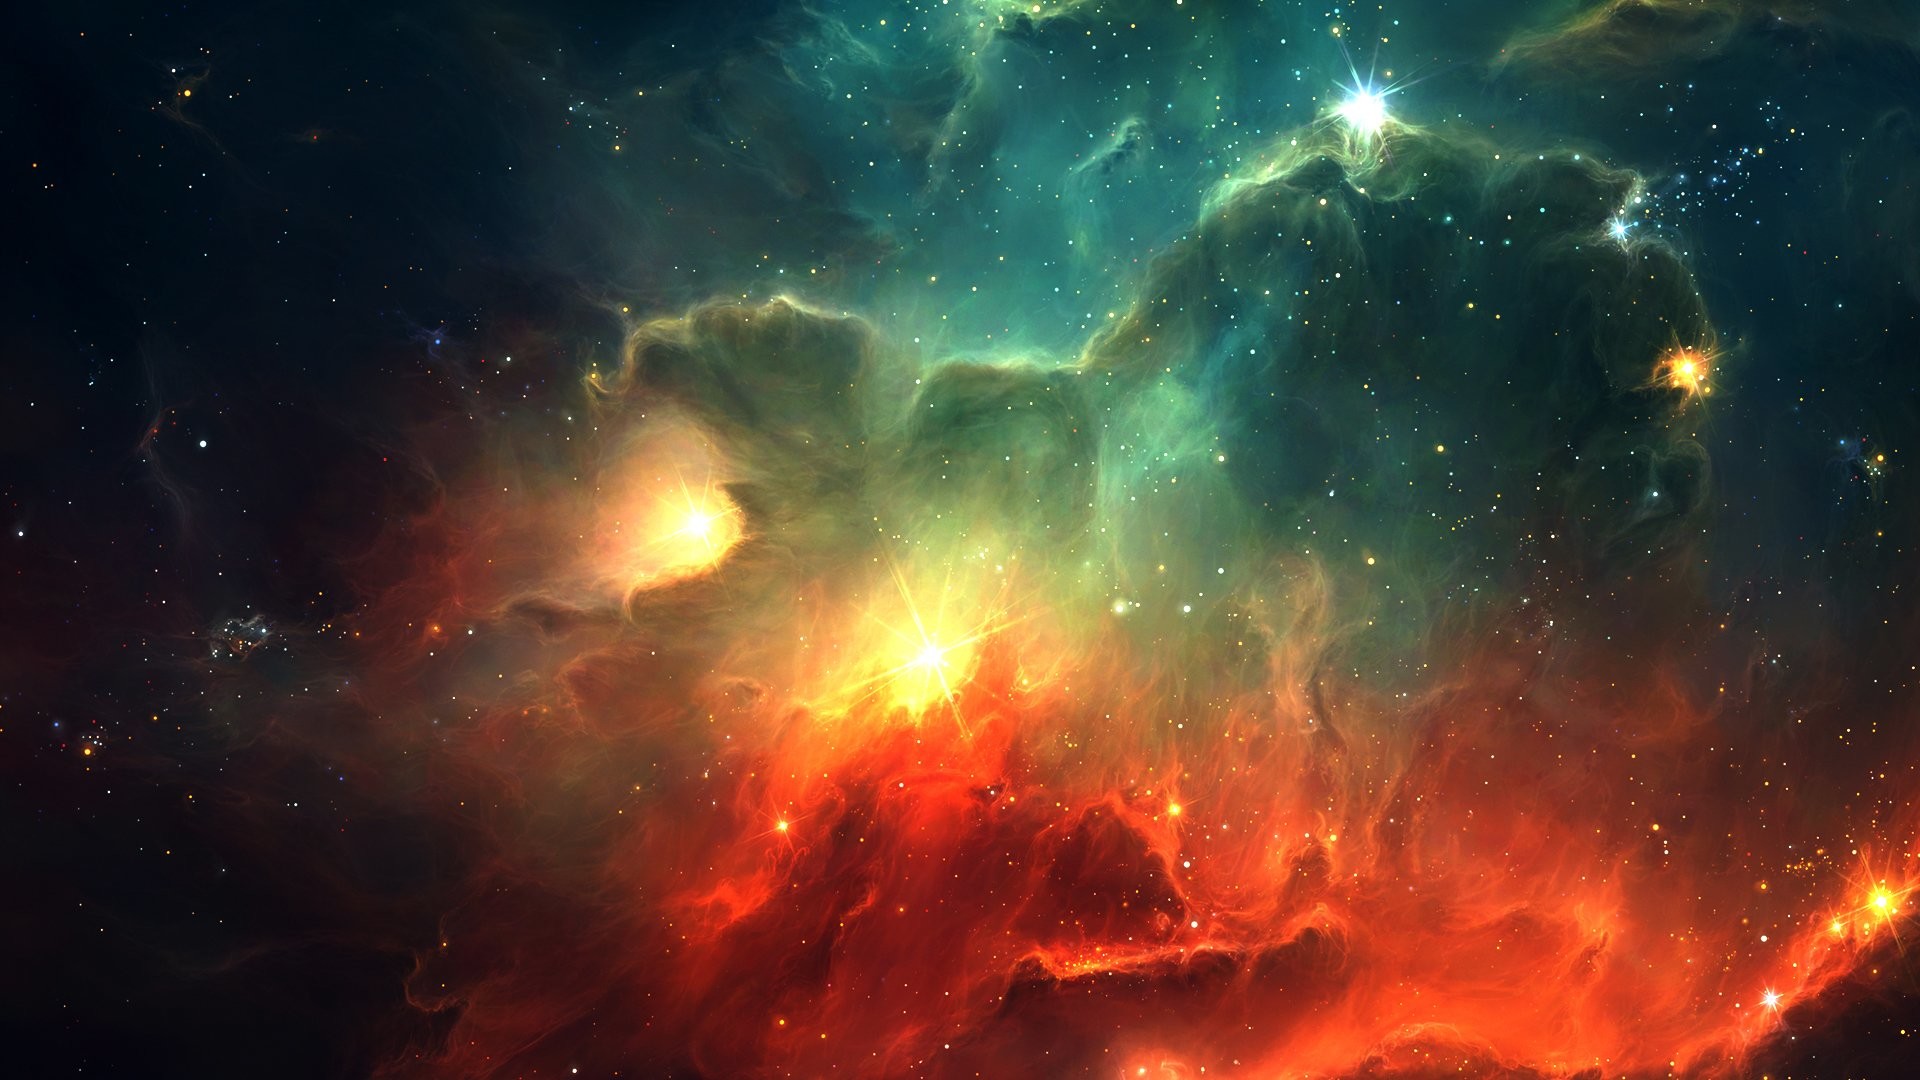 1920x1080 cool images, fantasy,scifi, artwork, futuristic, mobile, space, backgrounds,  view science, background, art, artistic Wallpaper HD